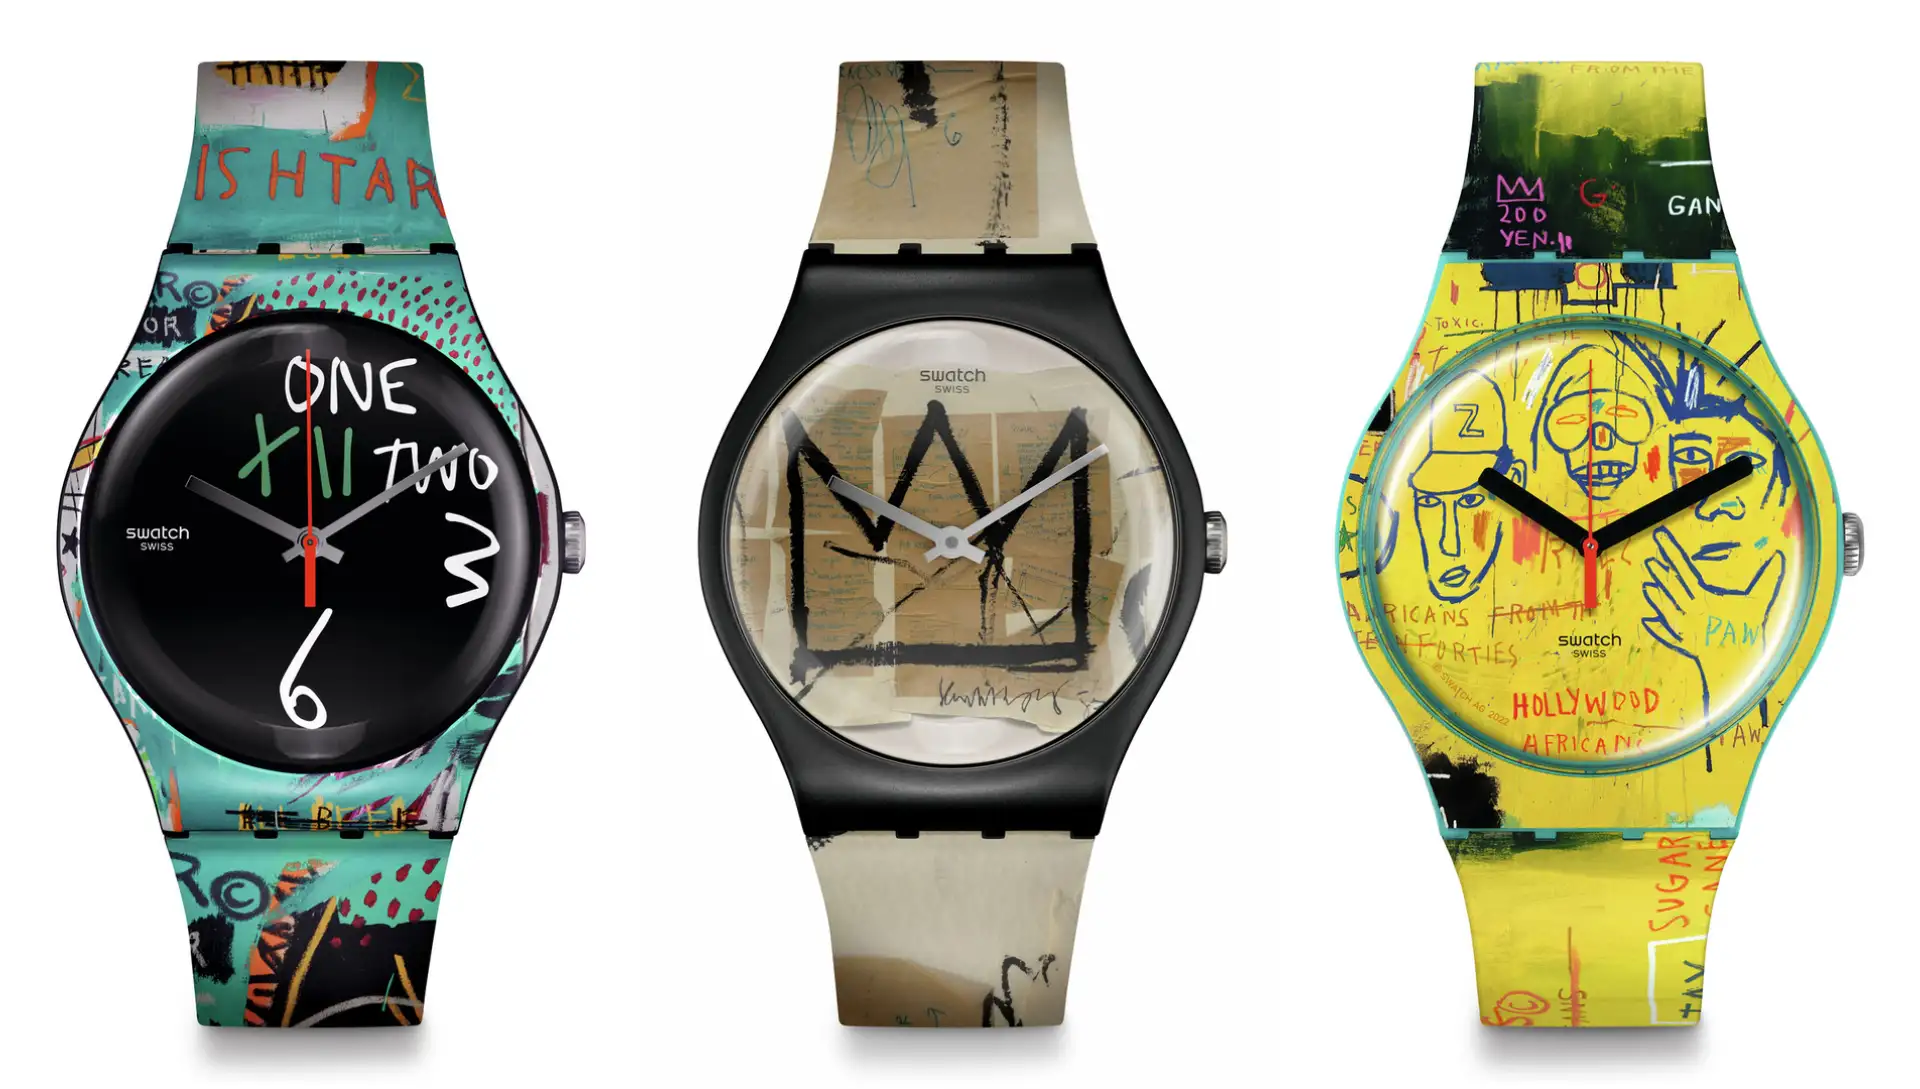 Swatch x basquiat: this is the new watch collection